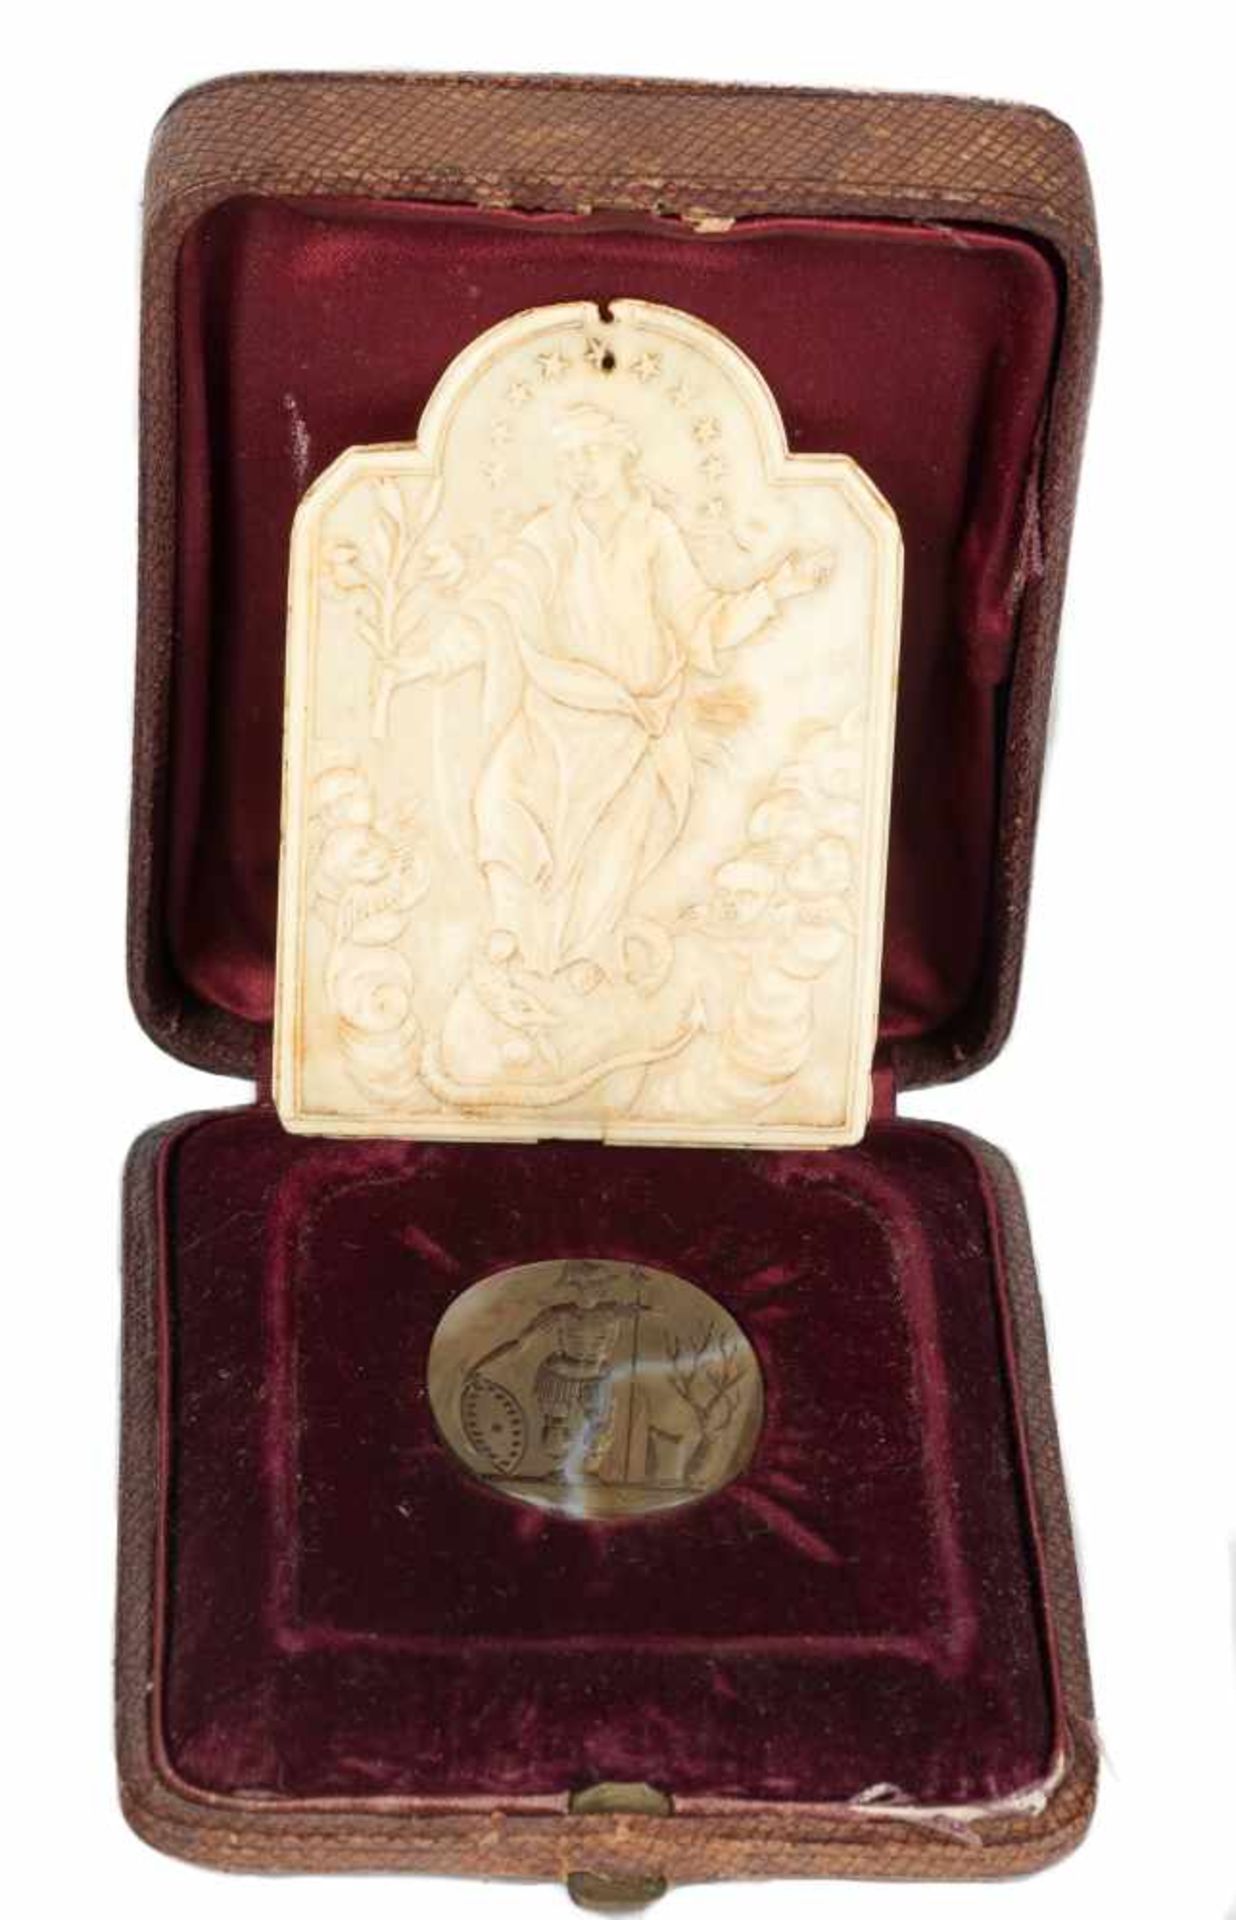 Set including:“Immaculate conception of Mary” Sculpted ivory plaque. European School. Circa 1700 and